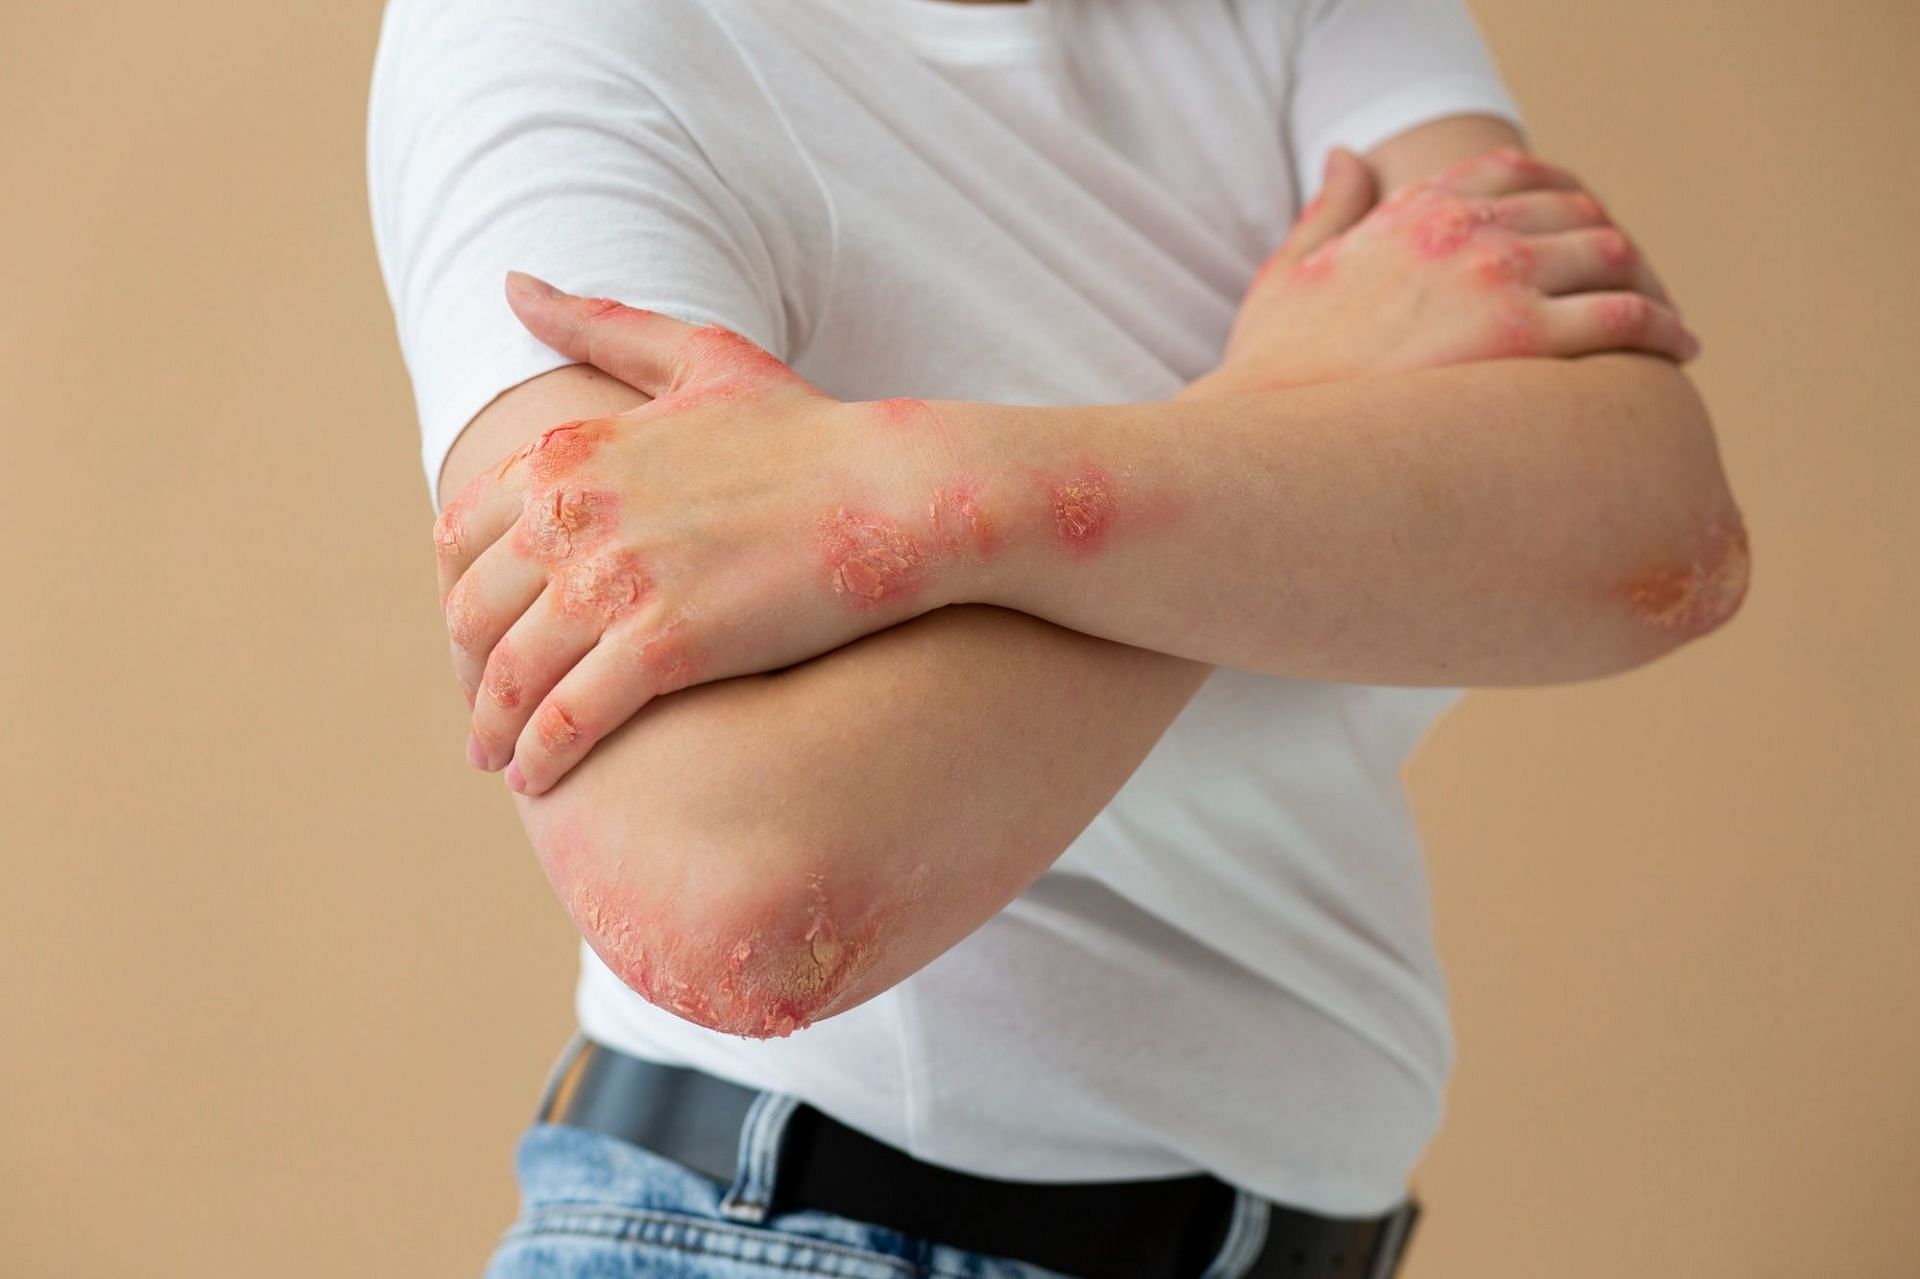 Staphylococcal scalded skin syndrome is a skin infection. (Photo via Freepik)